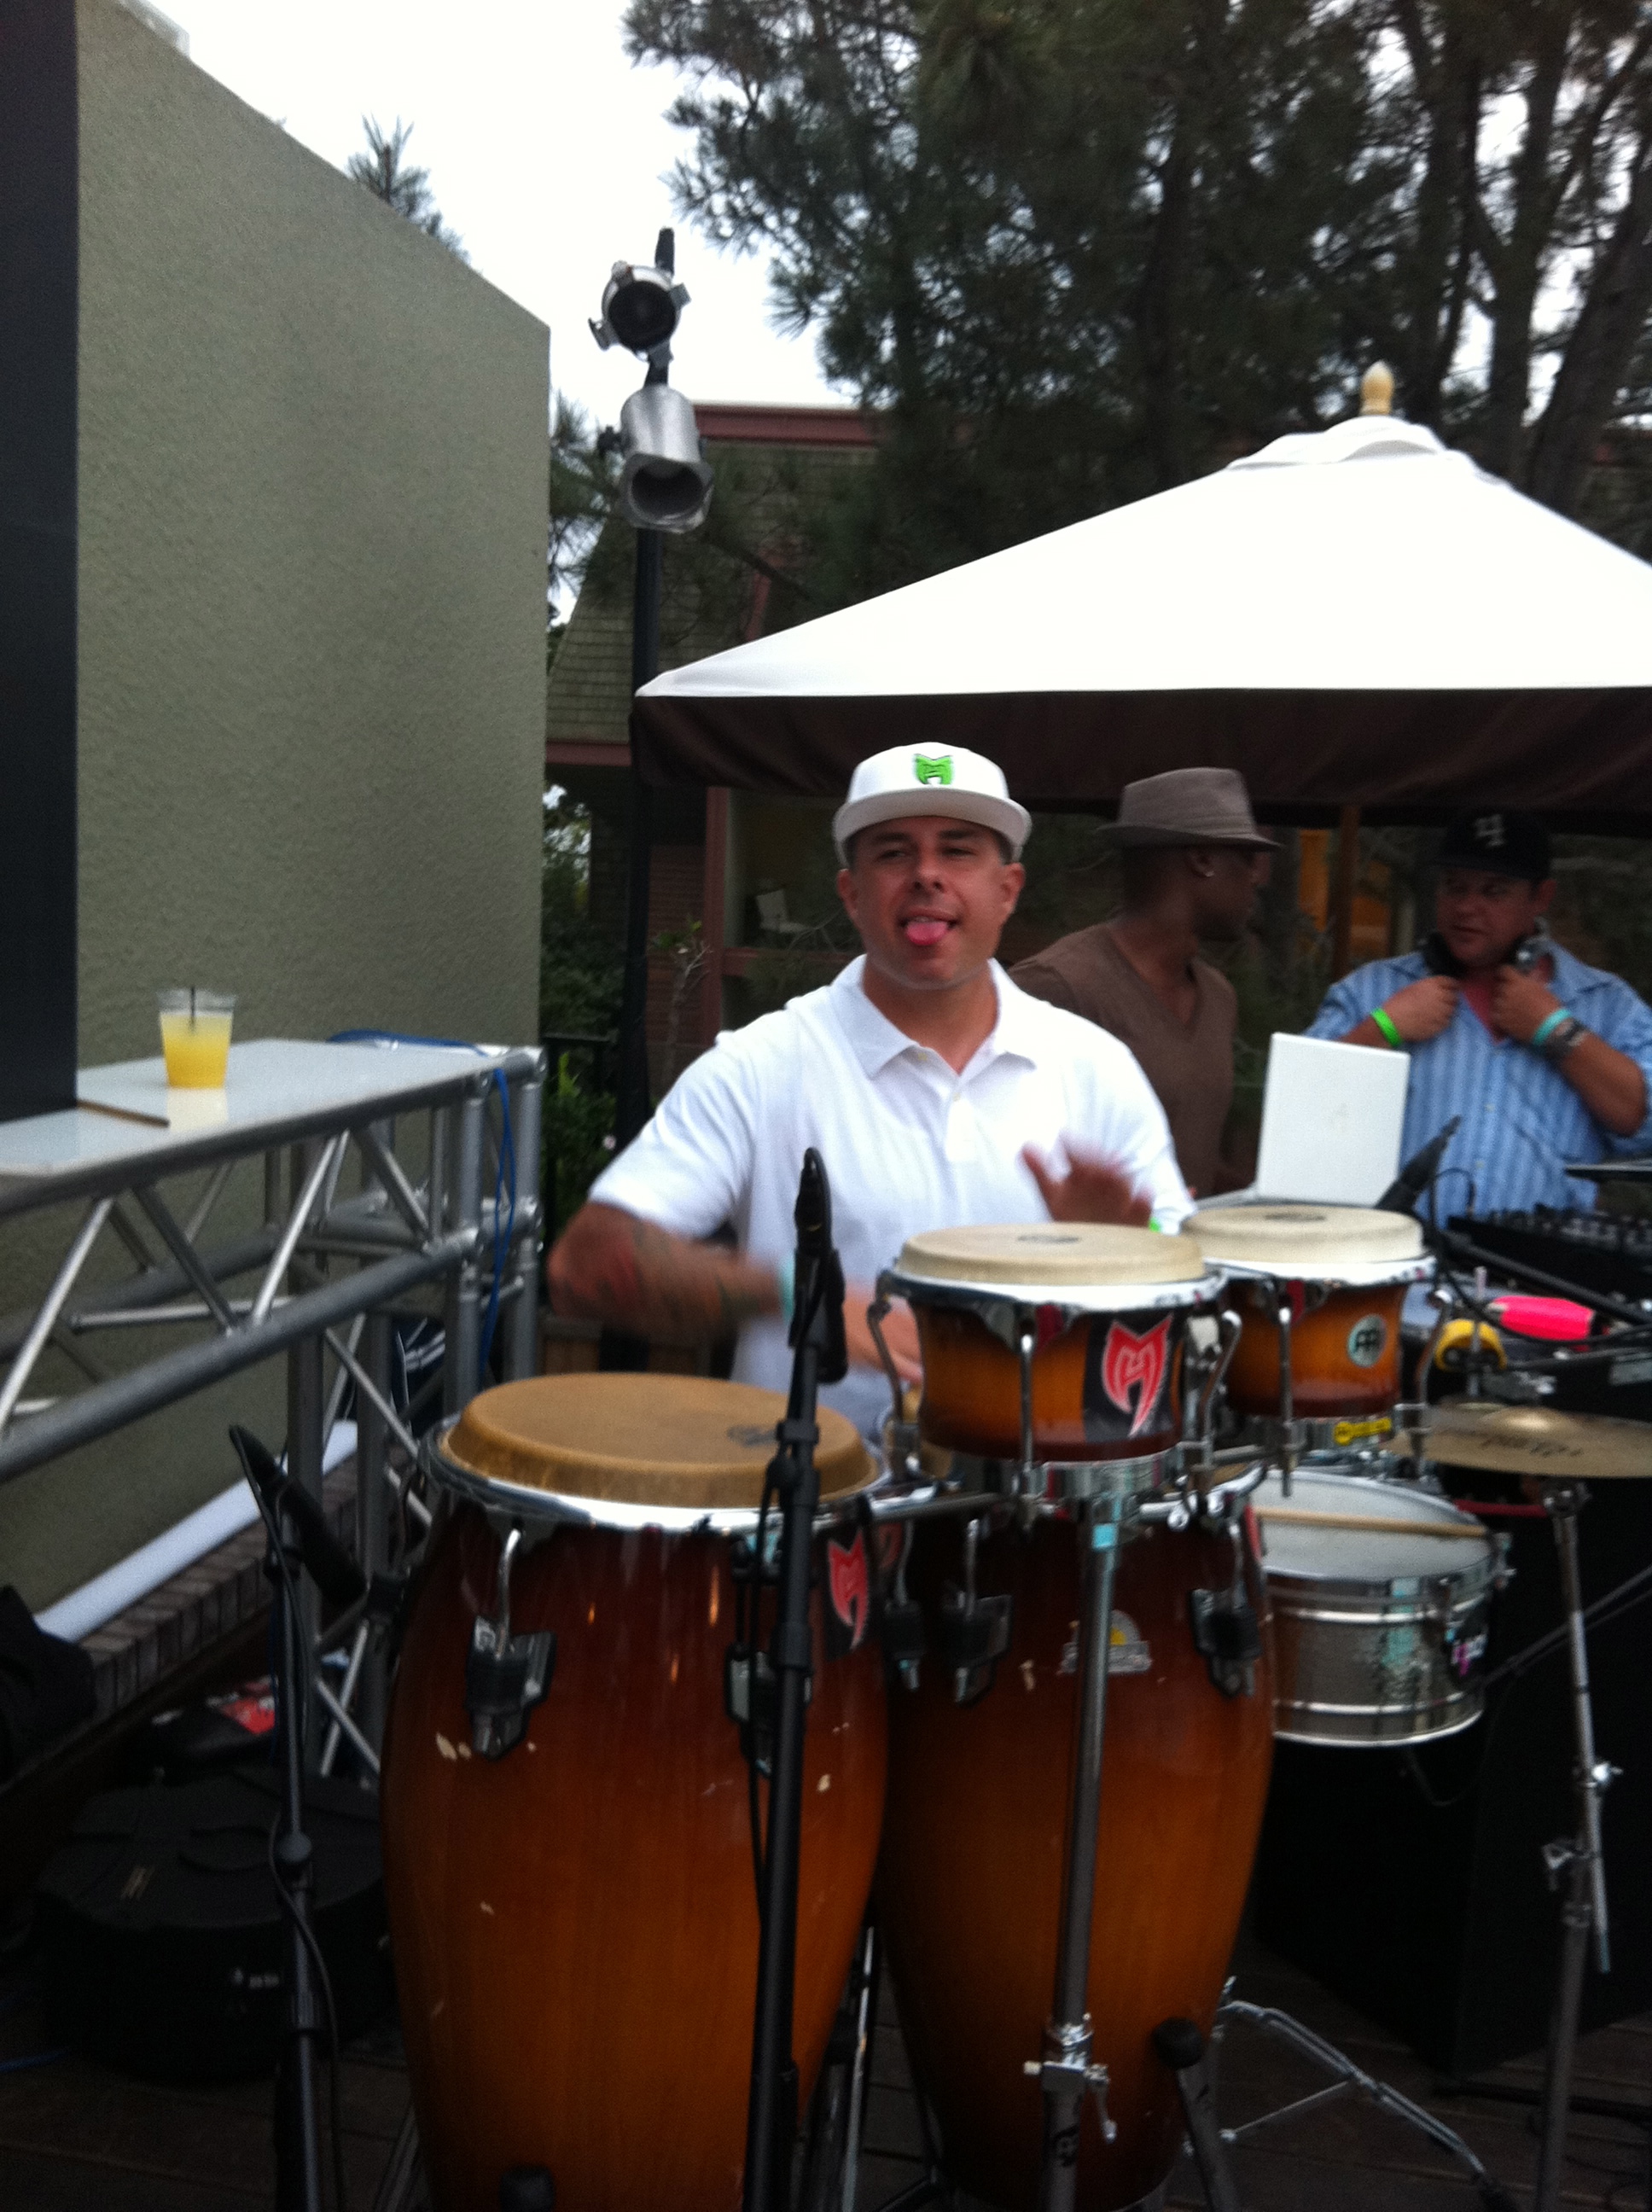 Check out Chuck Prada “Mean Hands” – Wildly talented Percussionist!